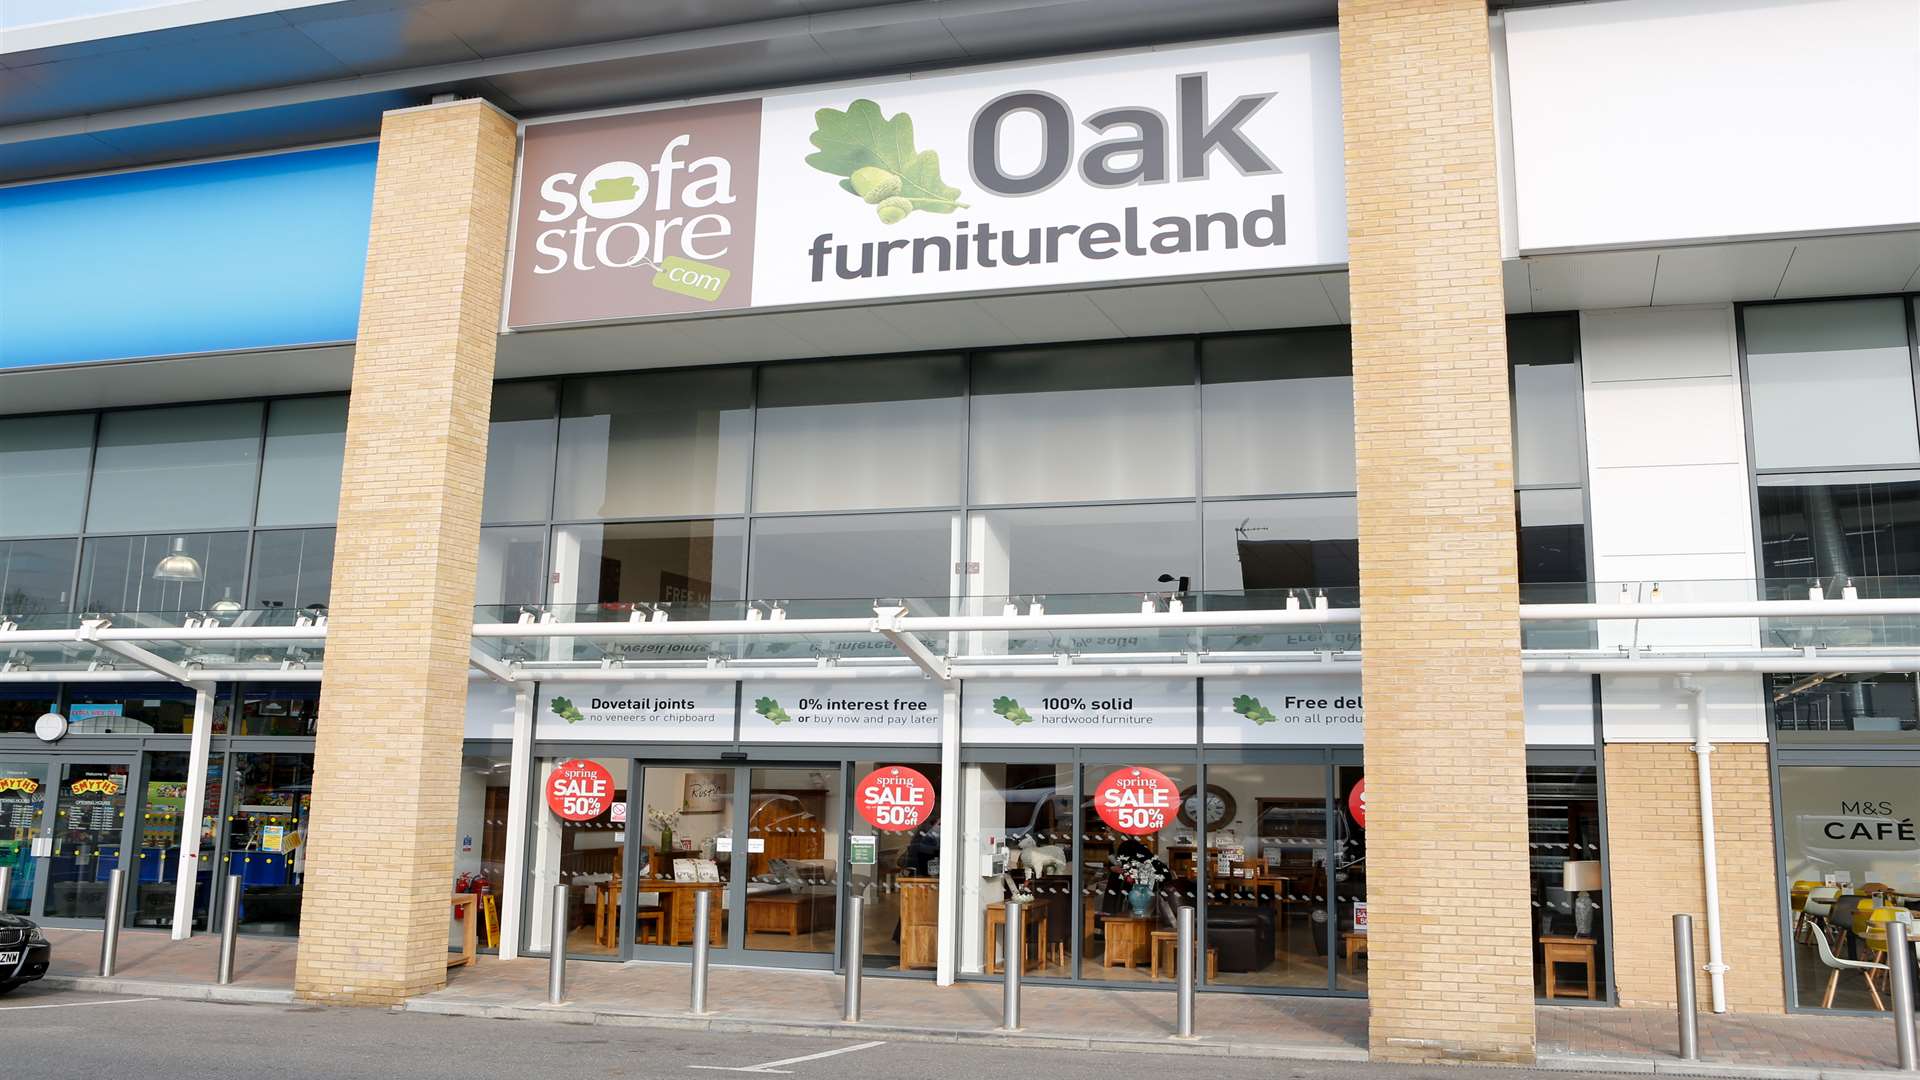 Oak Furniture Land has opened a new store in Aylesford